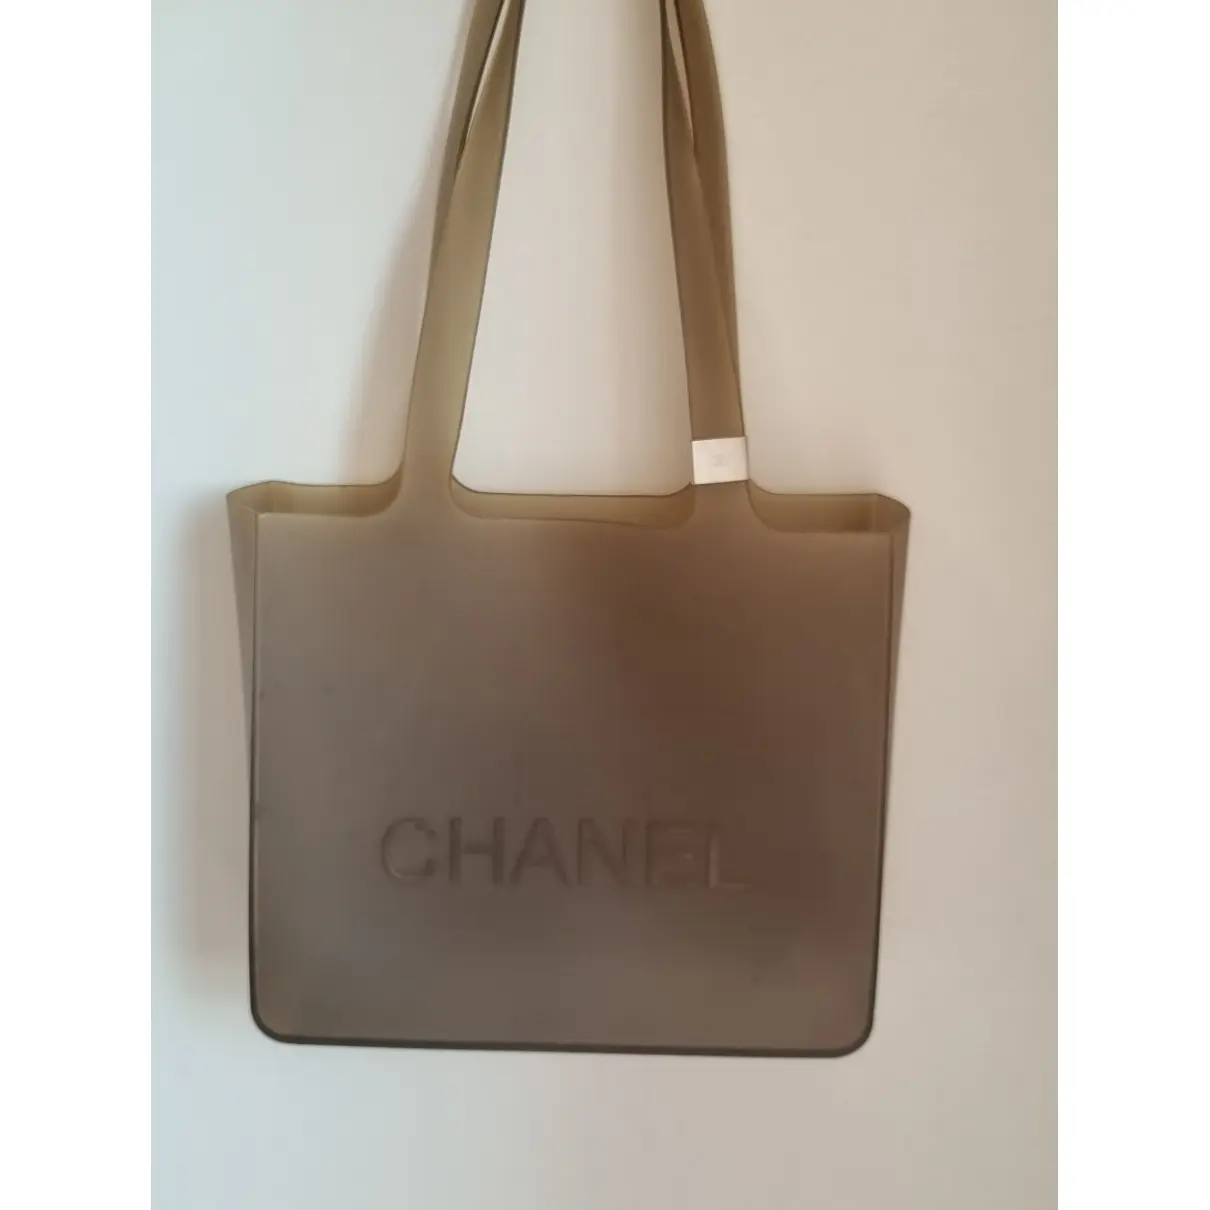 Buy Chanel Jelly tote online - Vintage